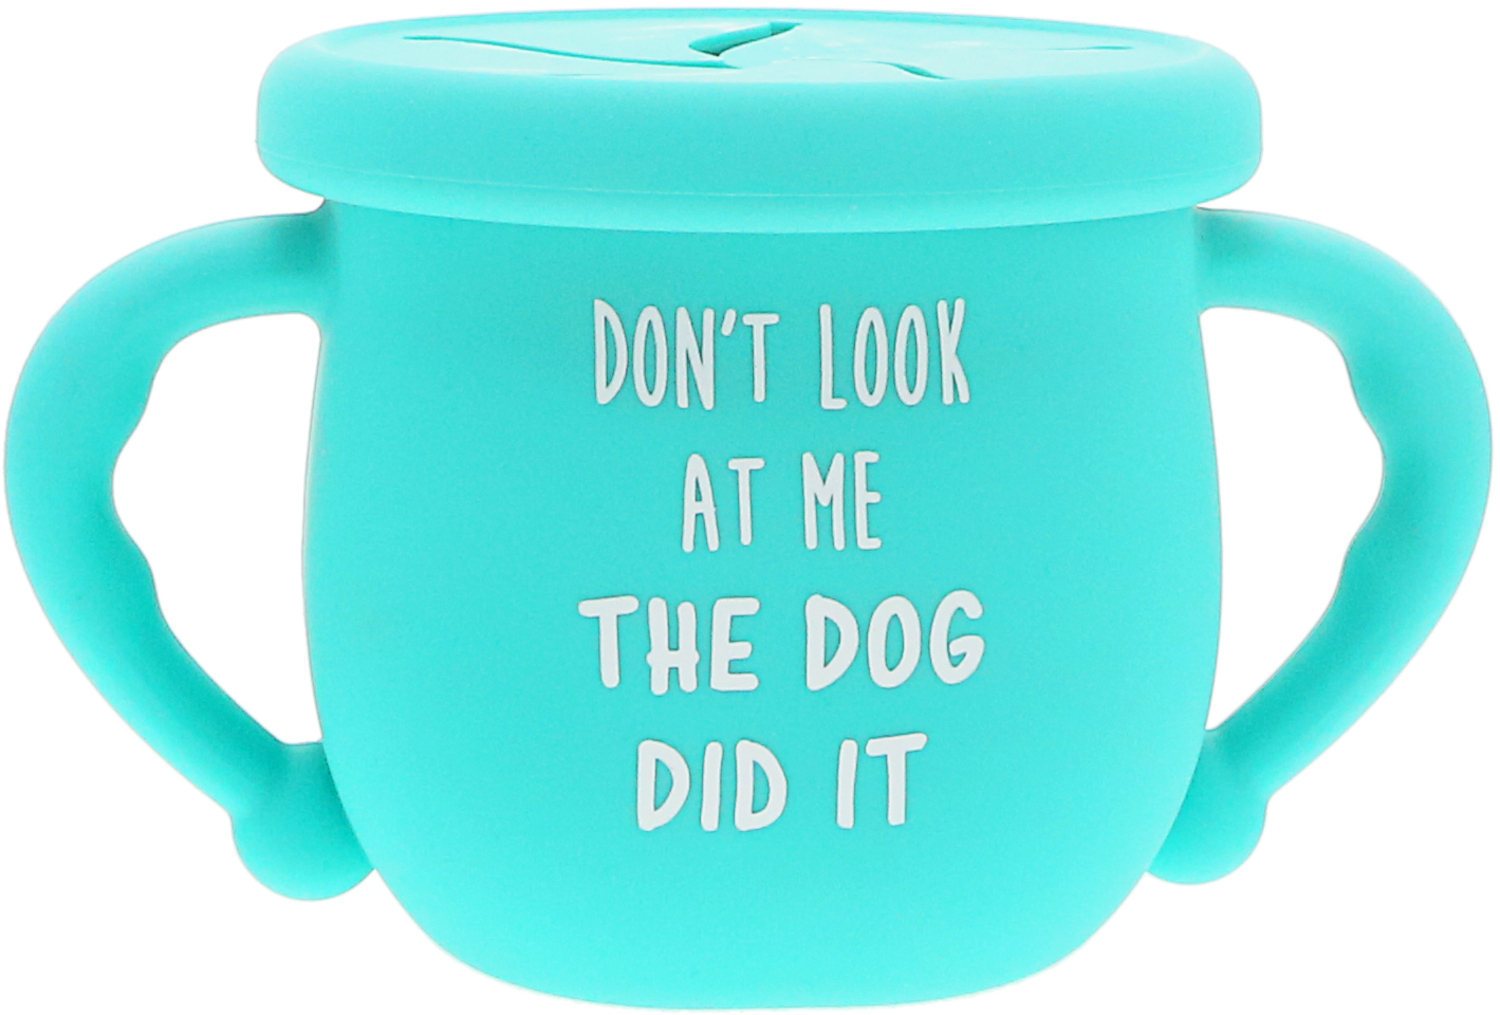 The Dog by Sidewalk Talk - The Dog - 3.5" Silicone Snack Bowl with Lid